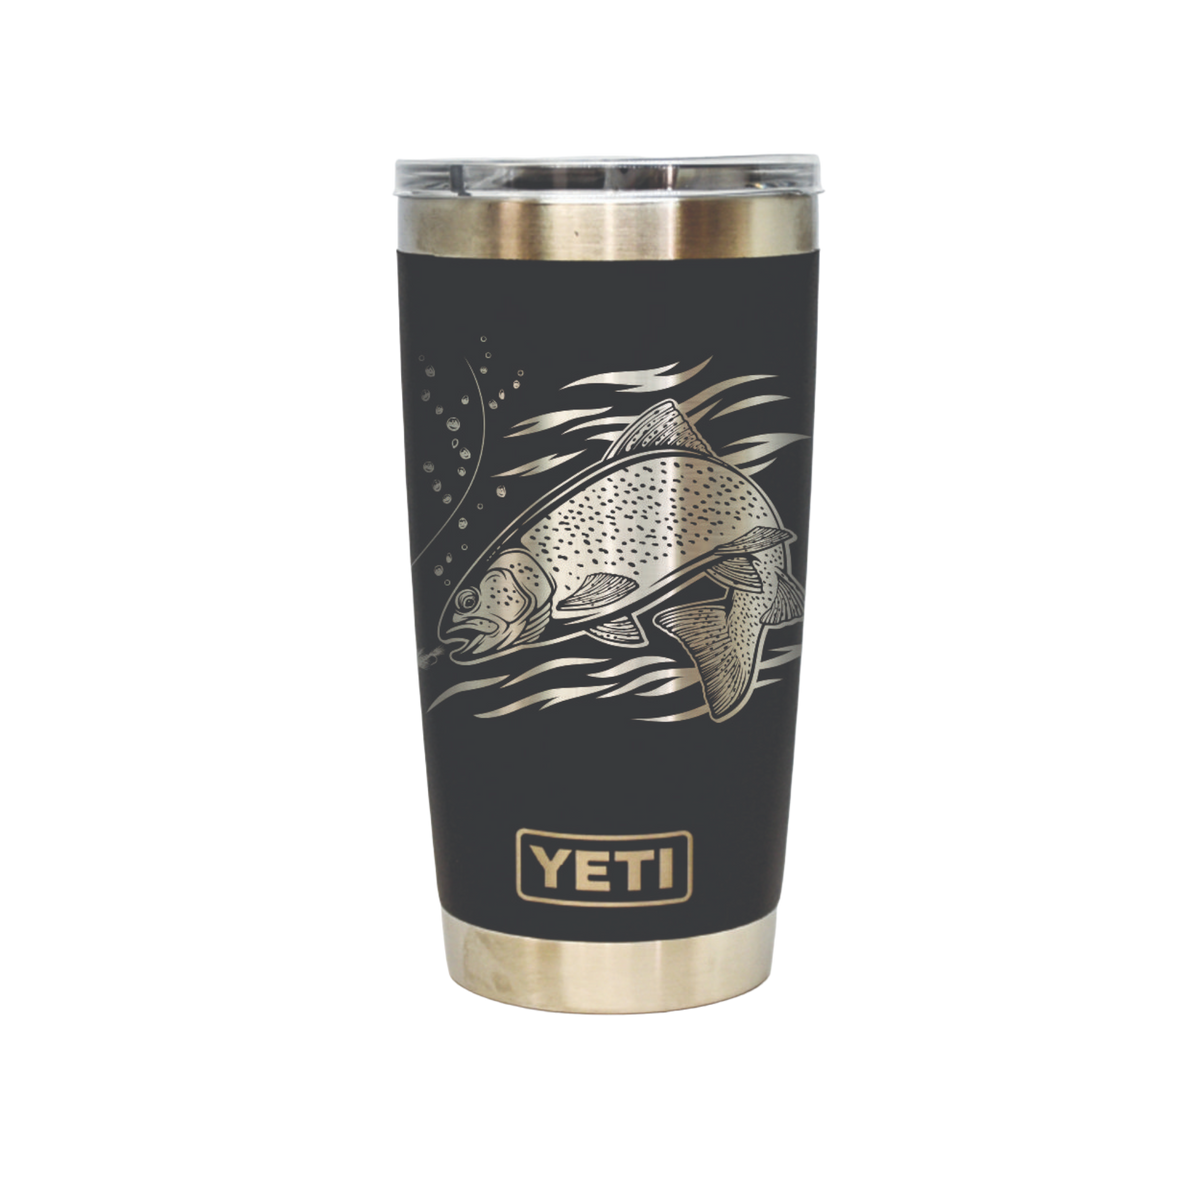 Personalized Fish Reaper, Fishing Gift, Angler, Laser Engraved YETI  Tumblers, Bottles, and Can Colsters. Available in Black, White, and Navy  colors